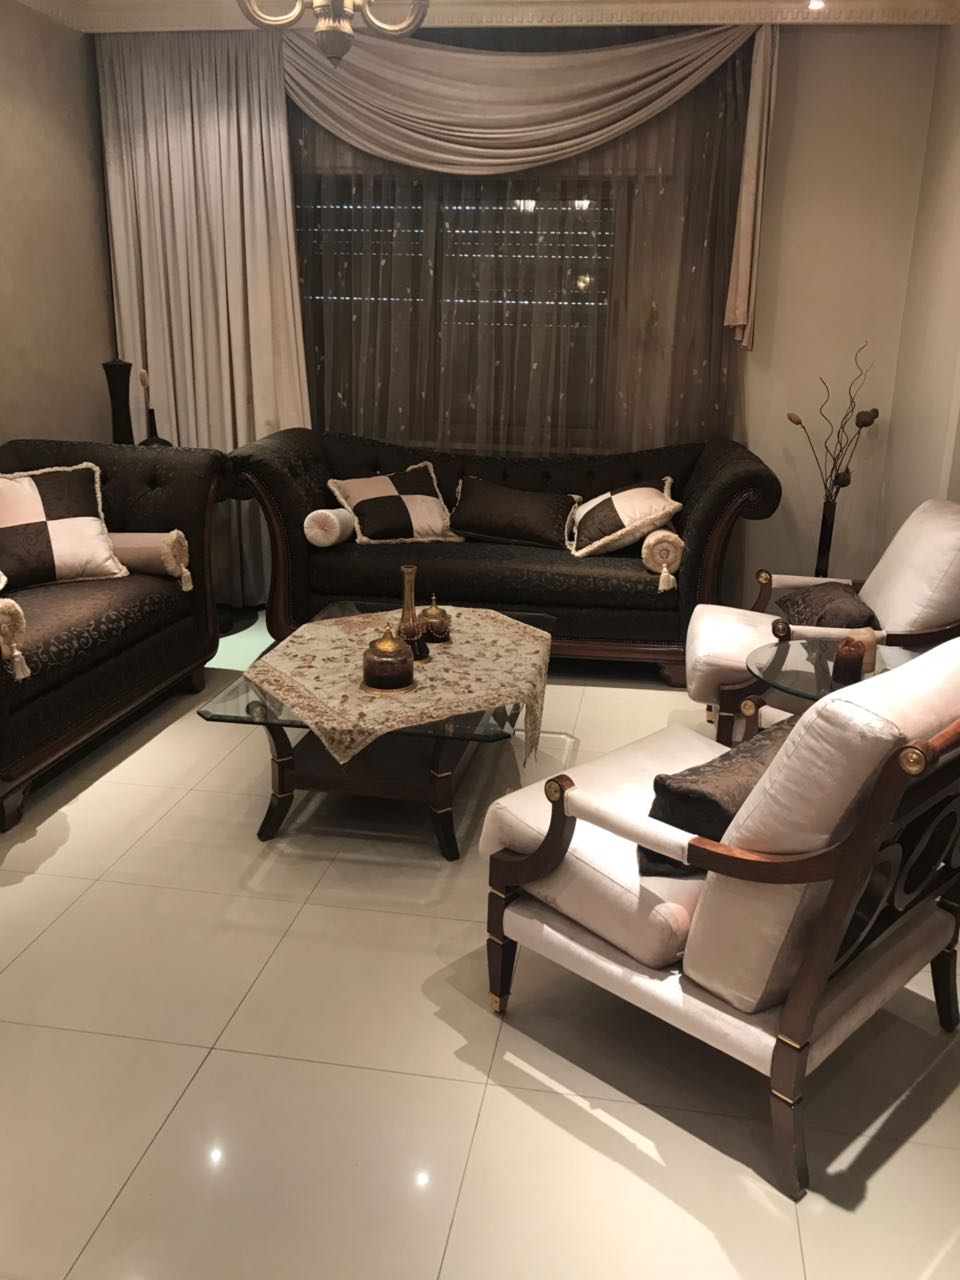 Fully furnished 1 bhk apartments available at prime location in al taawun sharjah monthly rent just 3200 AED-  شقة طابق اول فاخرة مفروشة...